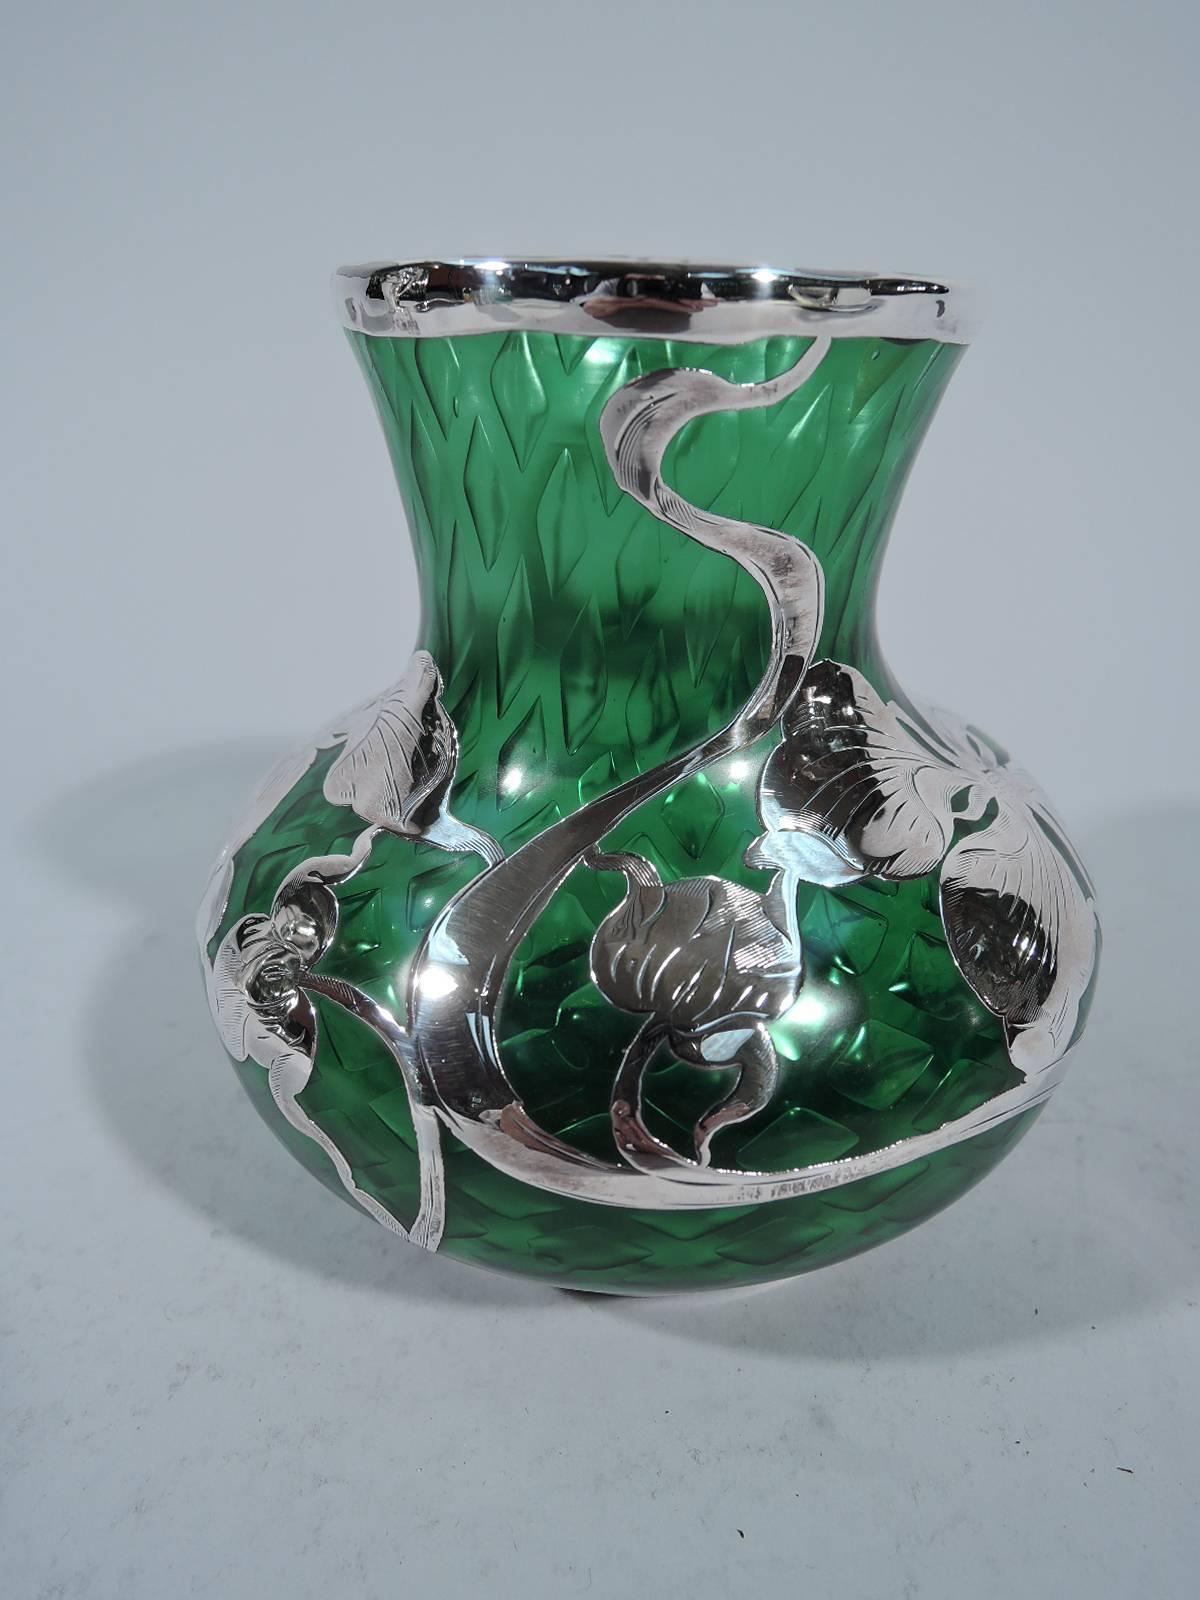 Art Nouveau quilted emerald glass vase with silver overlay. Made by La Pierre (later part of International) in Newark, circa 1900. Bellied bowl with short and gently tapering neck. Flowers and whiplash lines strewn over glass. Faint hallmark.